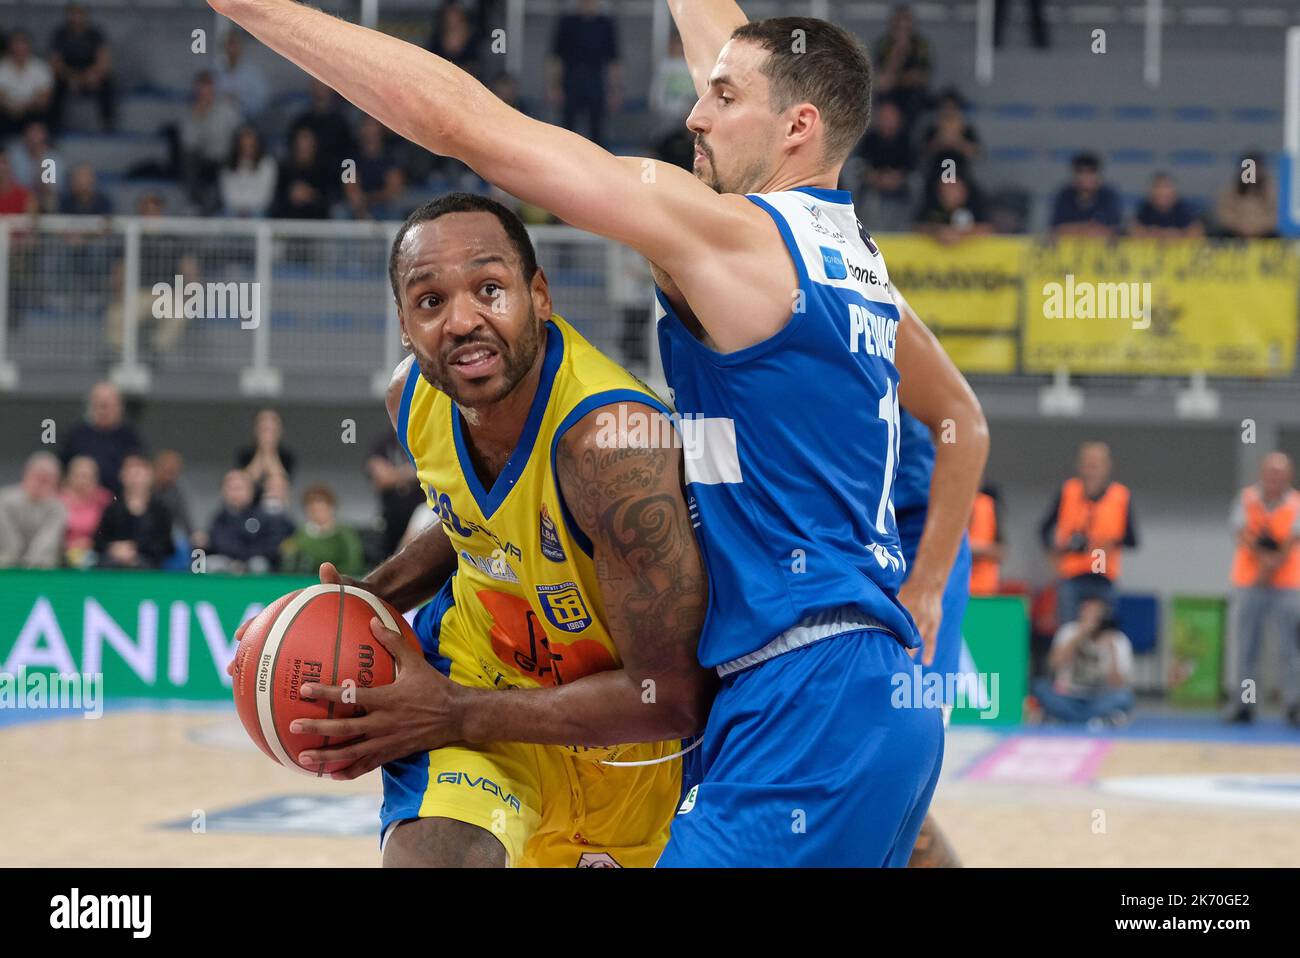 Brescia, Italy. 16th Oct, 2022. Mike Henry - Ginova Scafati opposed by John Petrucelli - Germani Basket Brescia during Germani Basket Brescia vs Ginova Scafati, Italian Basketball A Serie Championship in Brescia, Italy, October 16 2022 Credit: Independent Photo Agency/Alamy Live News Stock Photo